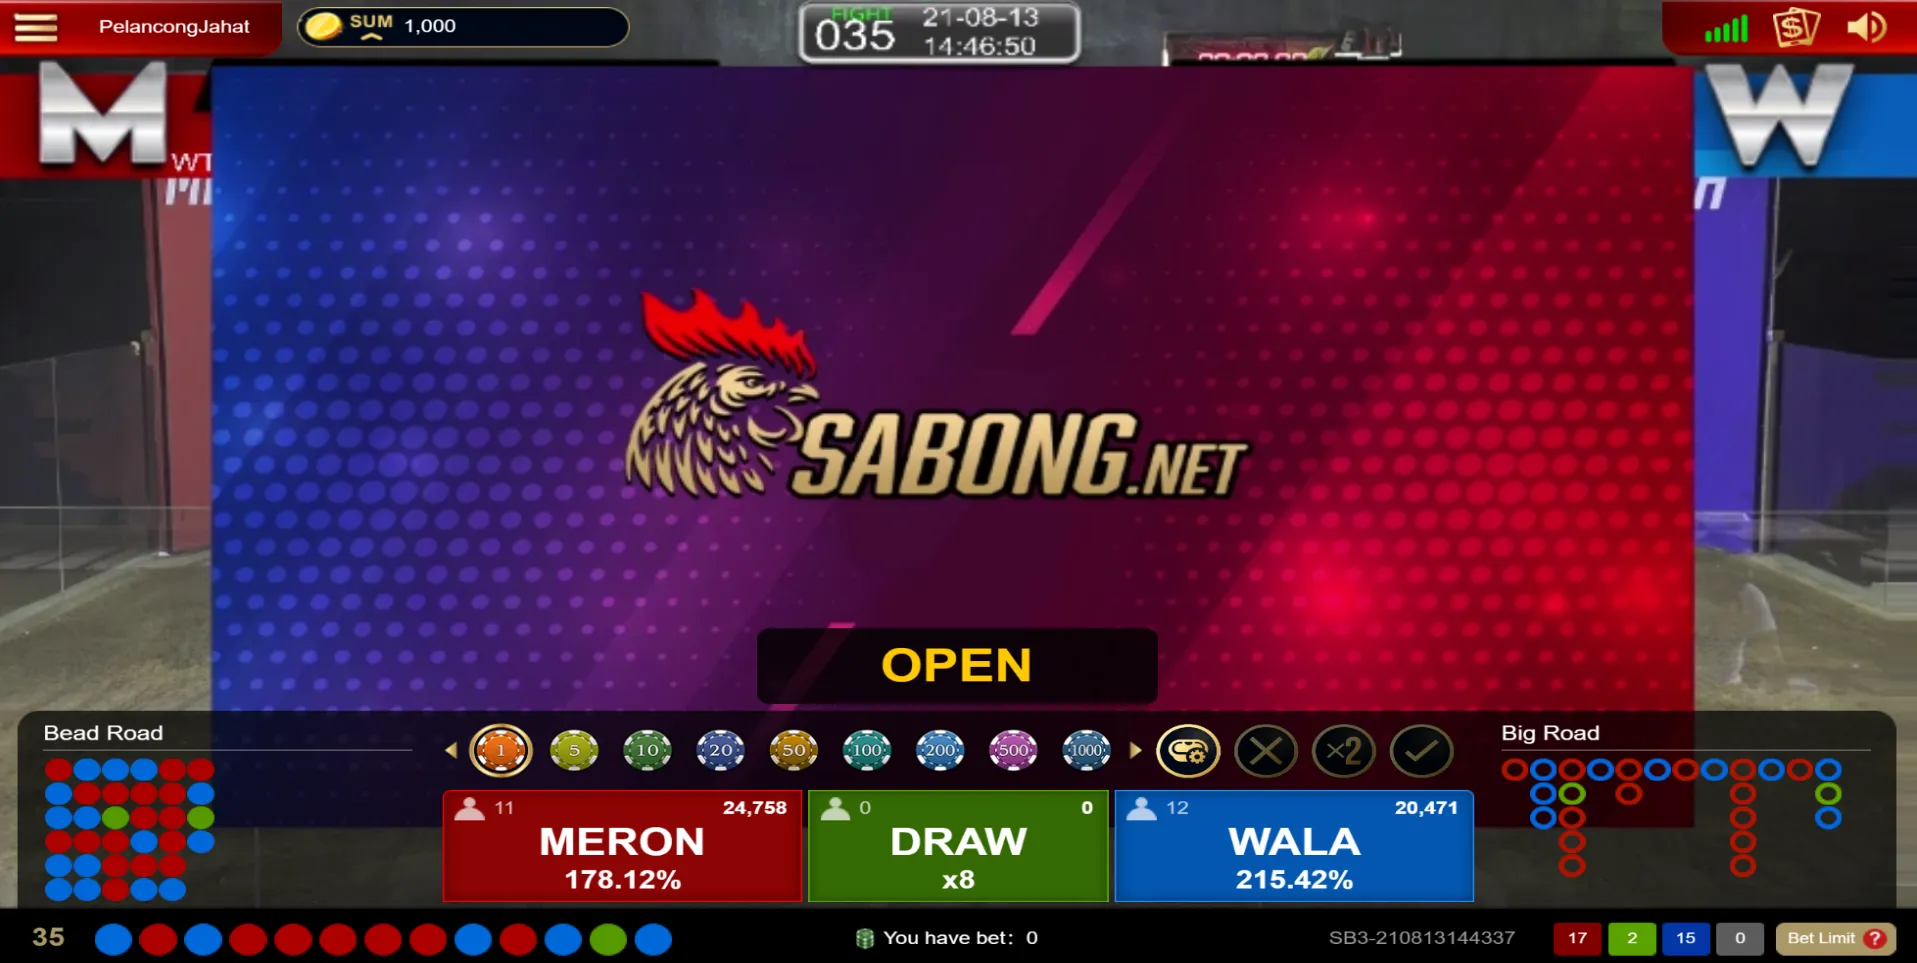 How to Play in Sabong